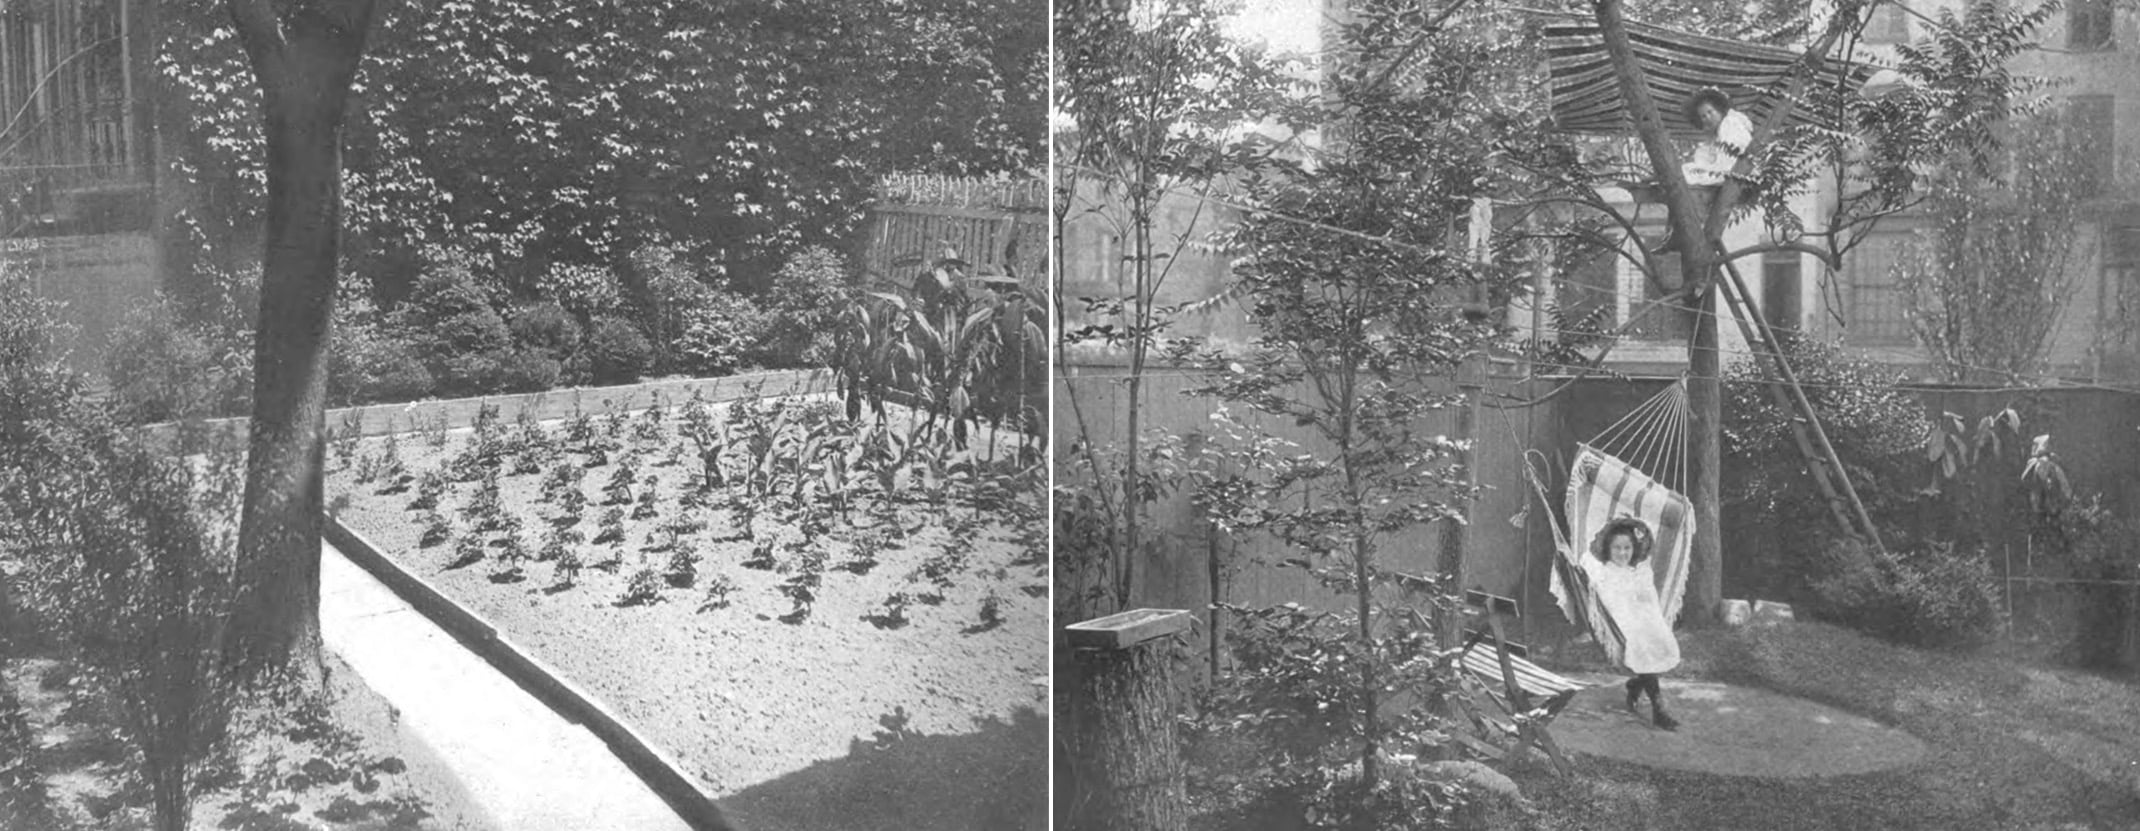 black and white photos showing a rear yard with sparse plantings and one with a landscaped yard